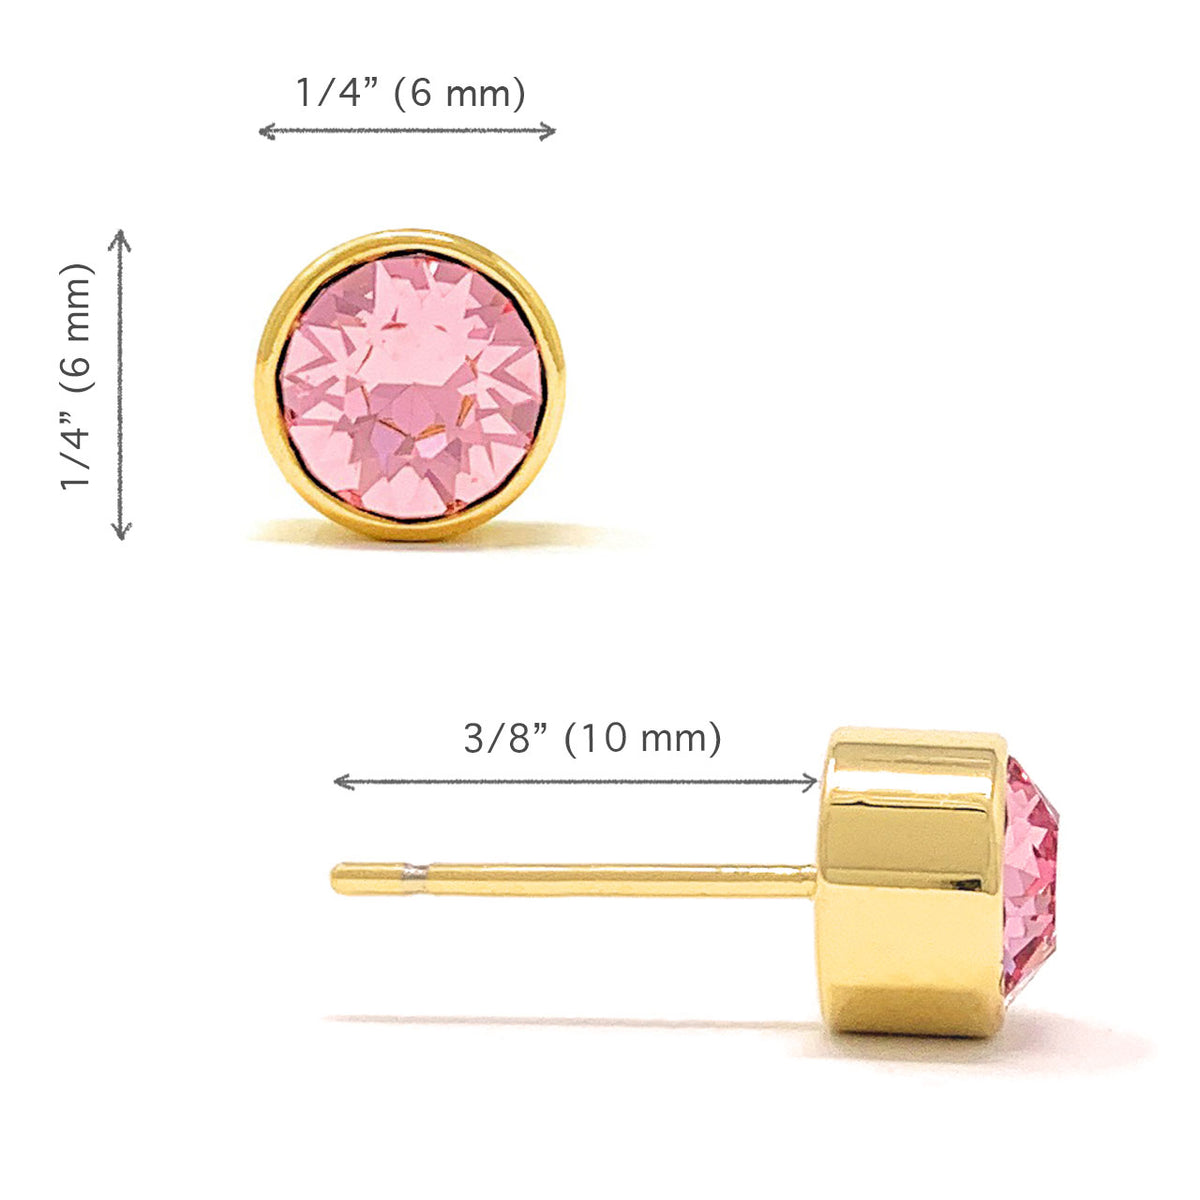 Harley Small Stud Earrings with Pink Light Rose Round Crystals from Swarovski Gold Plated - Ed Heart